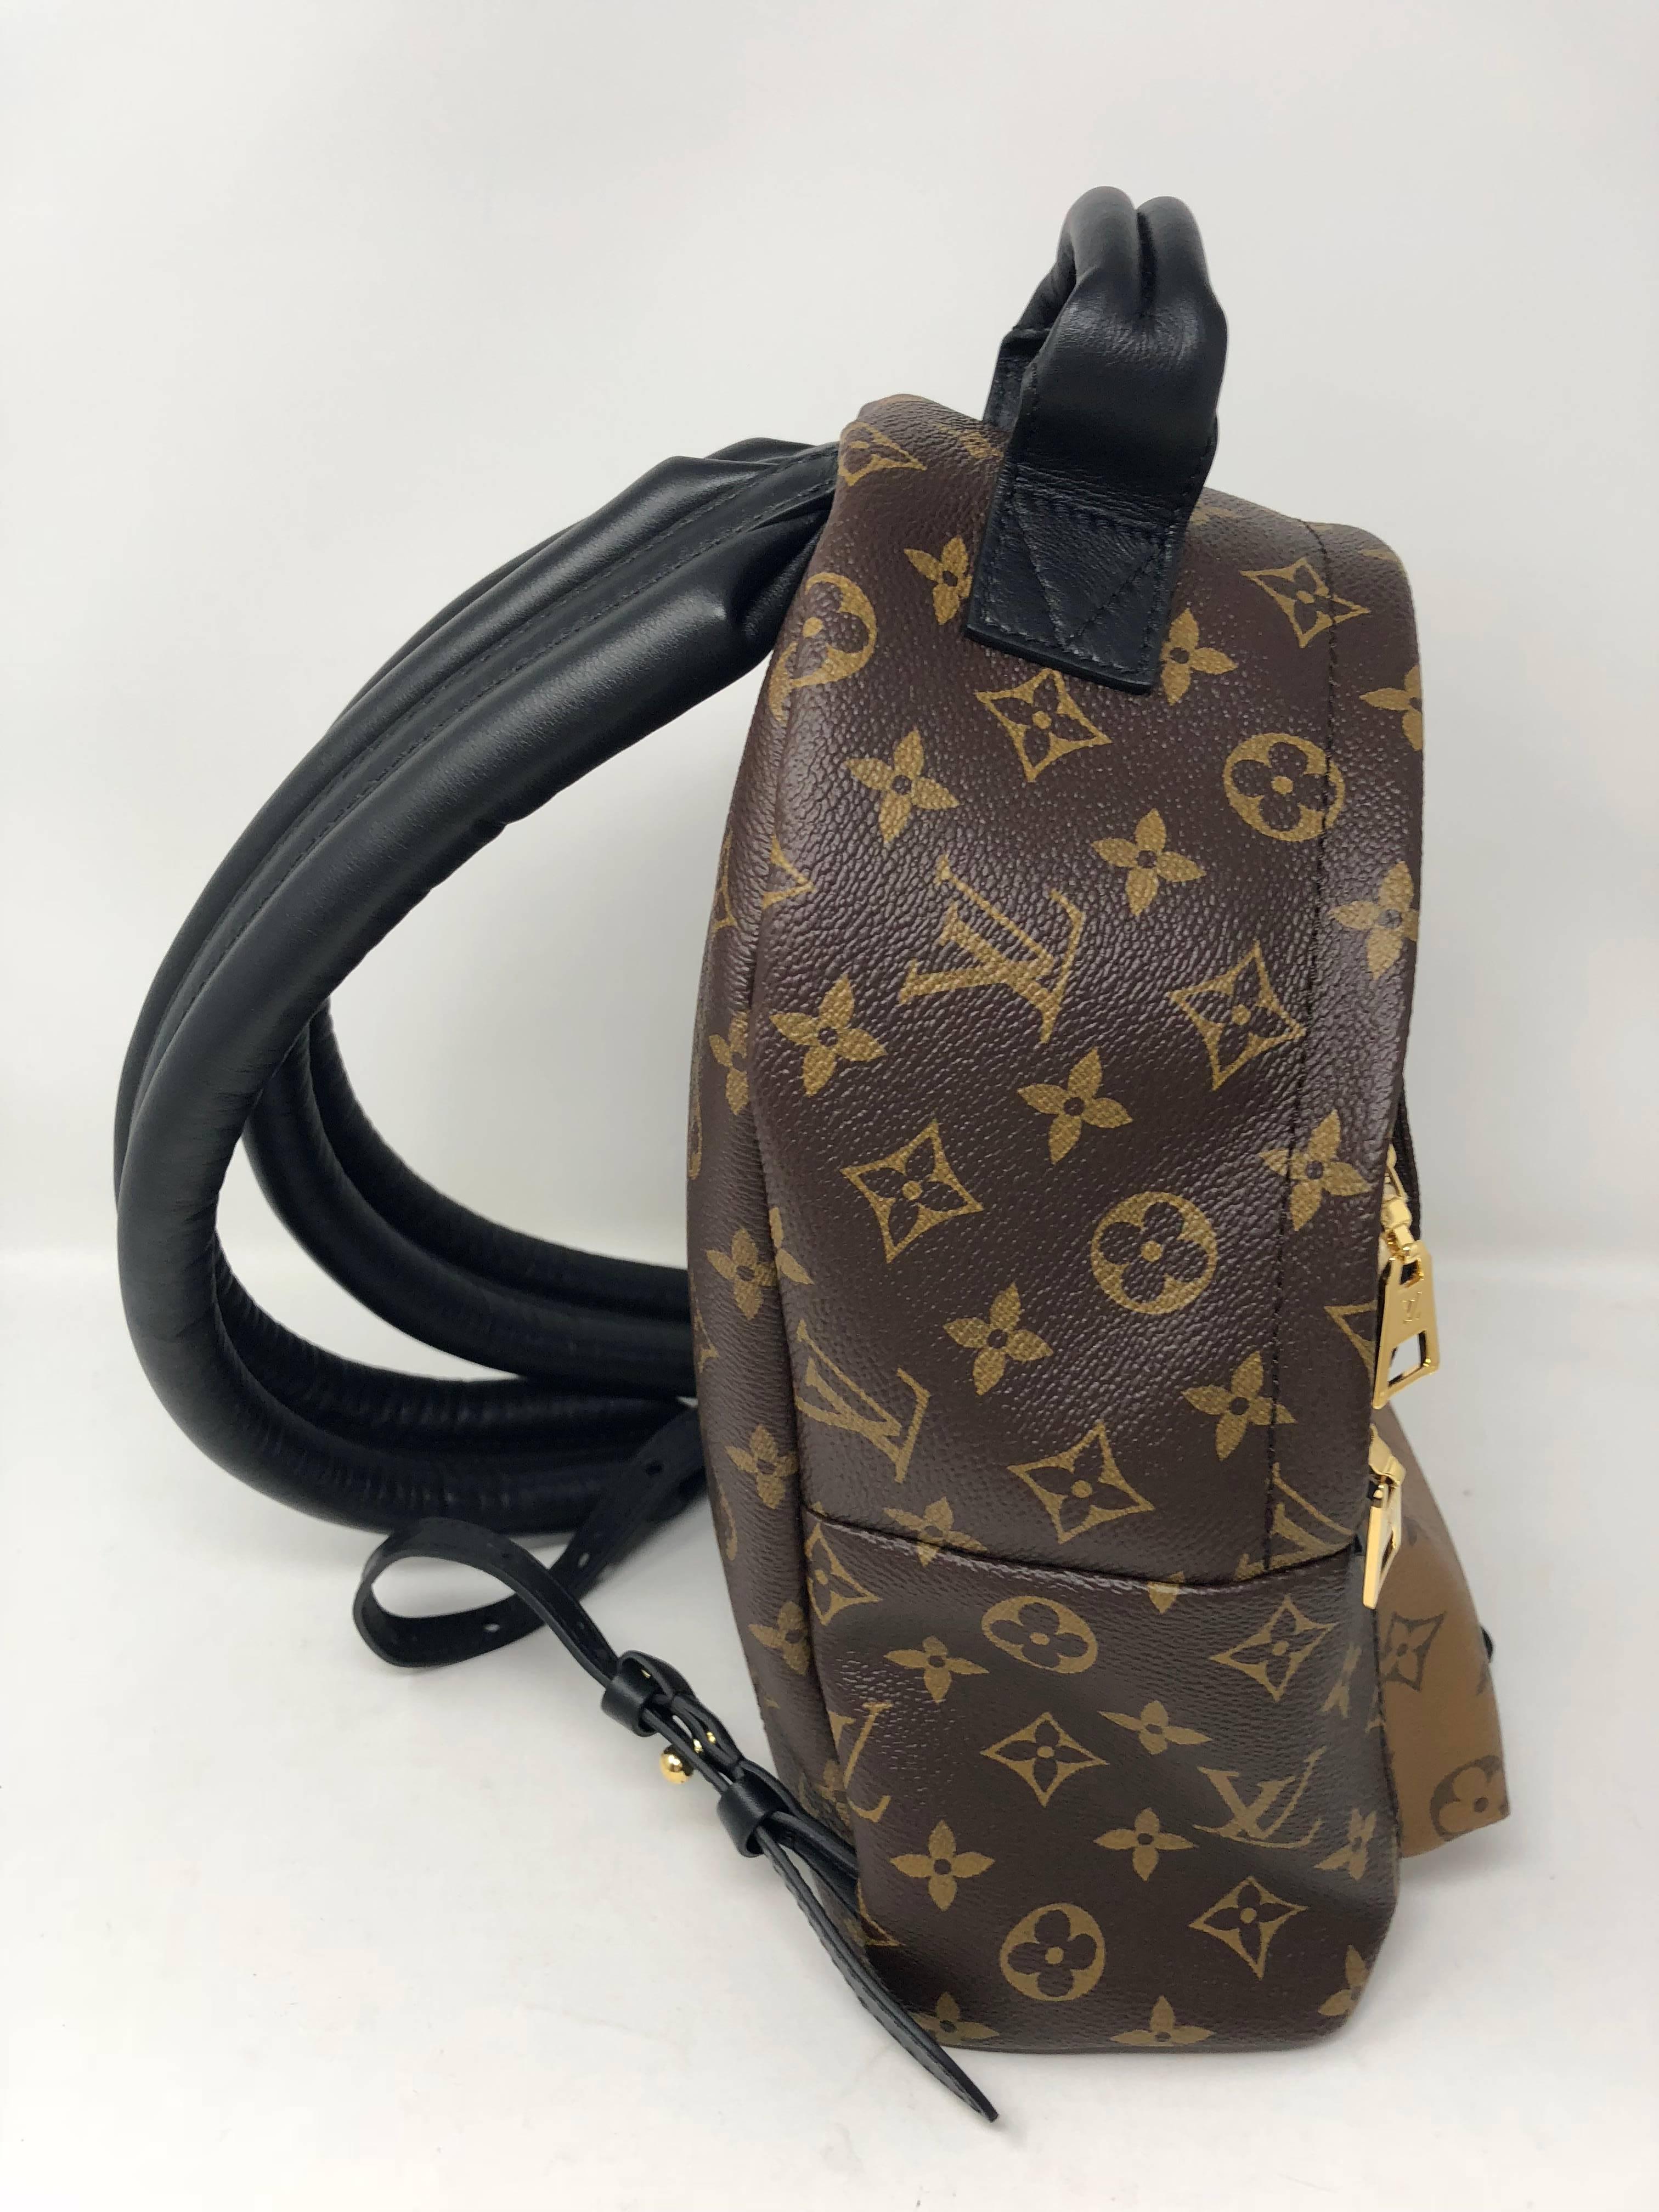 Louis Vuitton Reverse Palm Springs Backpack PM in new condition. The back pack handles are made of a strong black cowhide and are wide for easy comfort. They are also adjustable for any height. Unique reverse monogram covers the front pocket and the